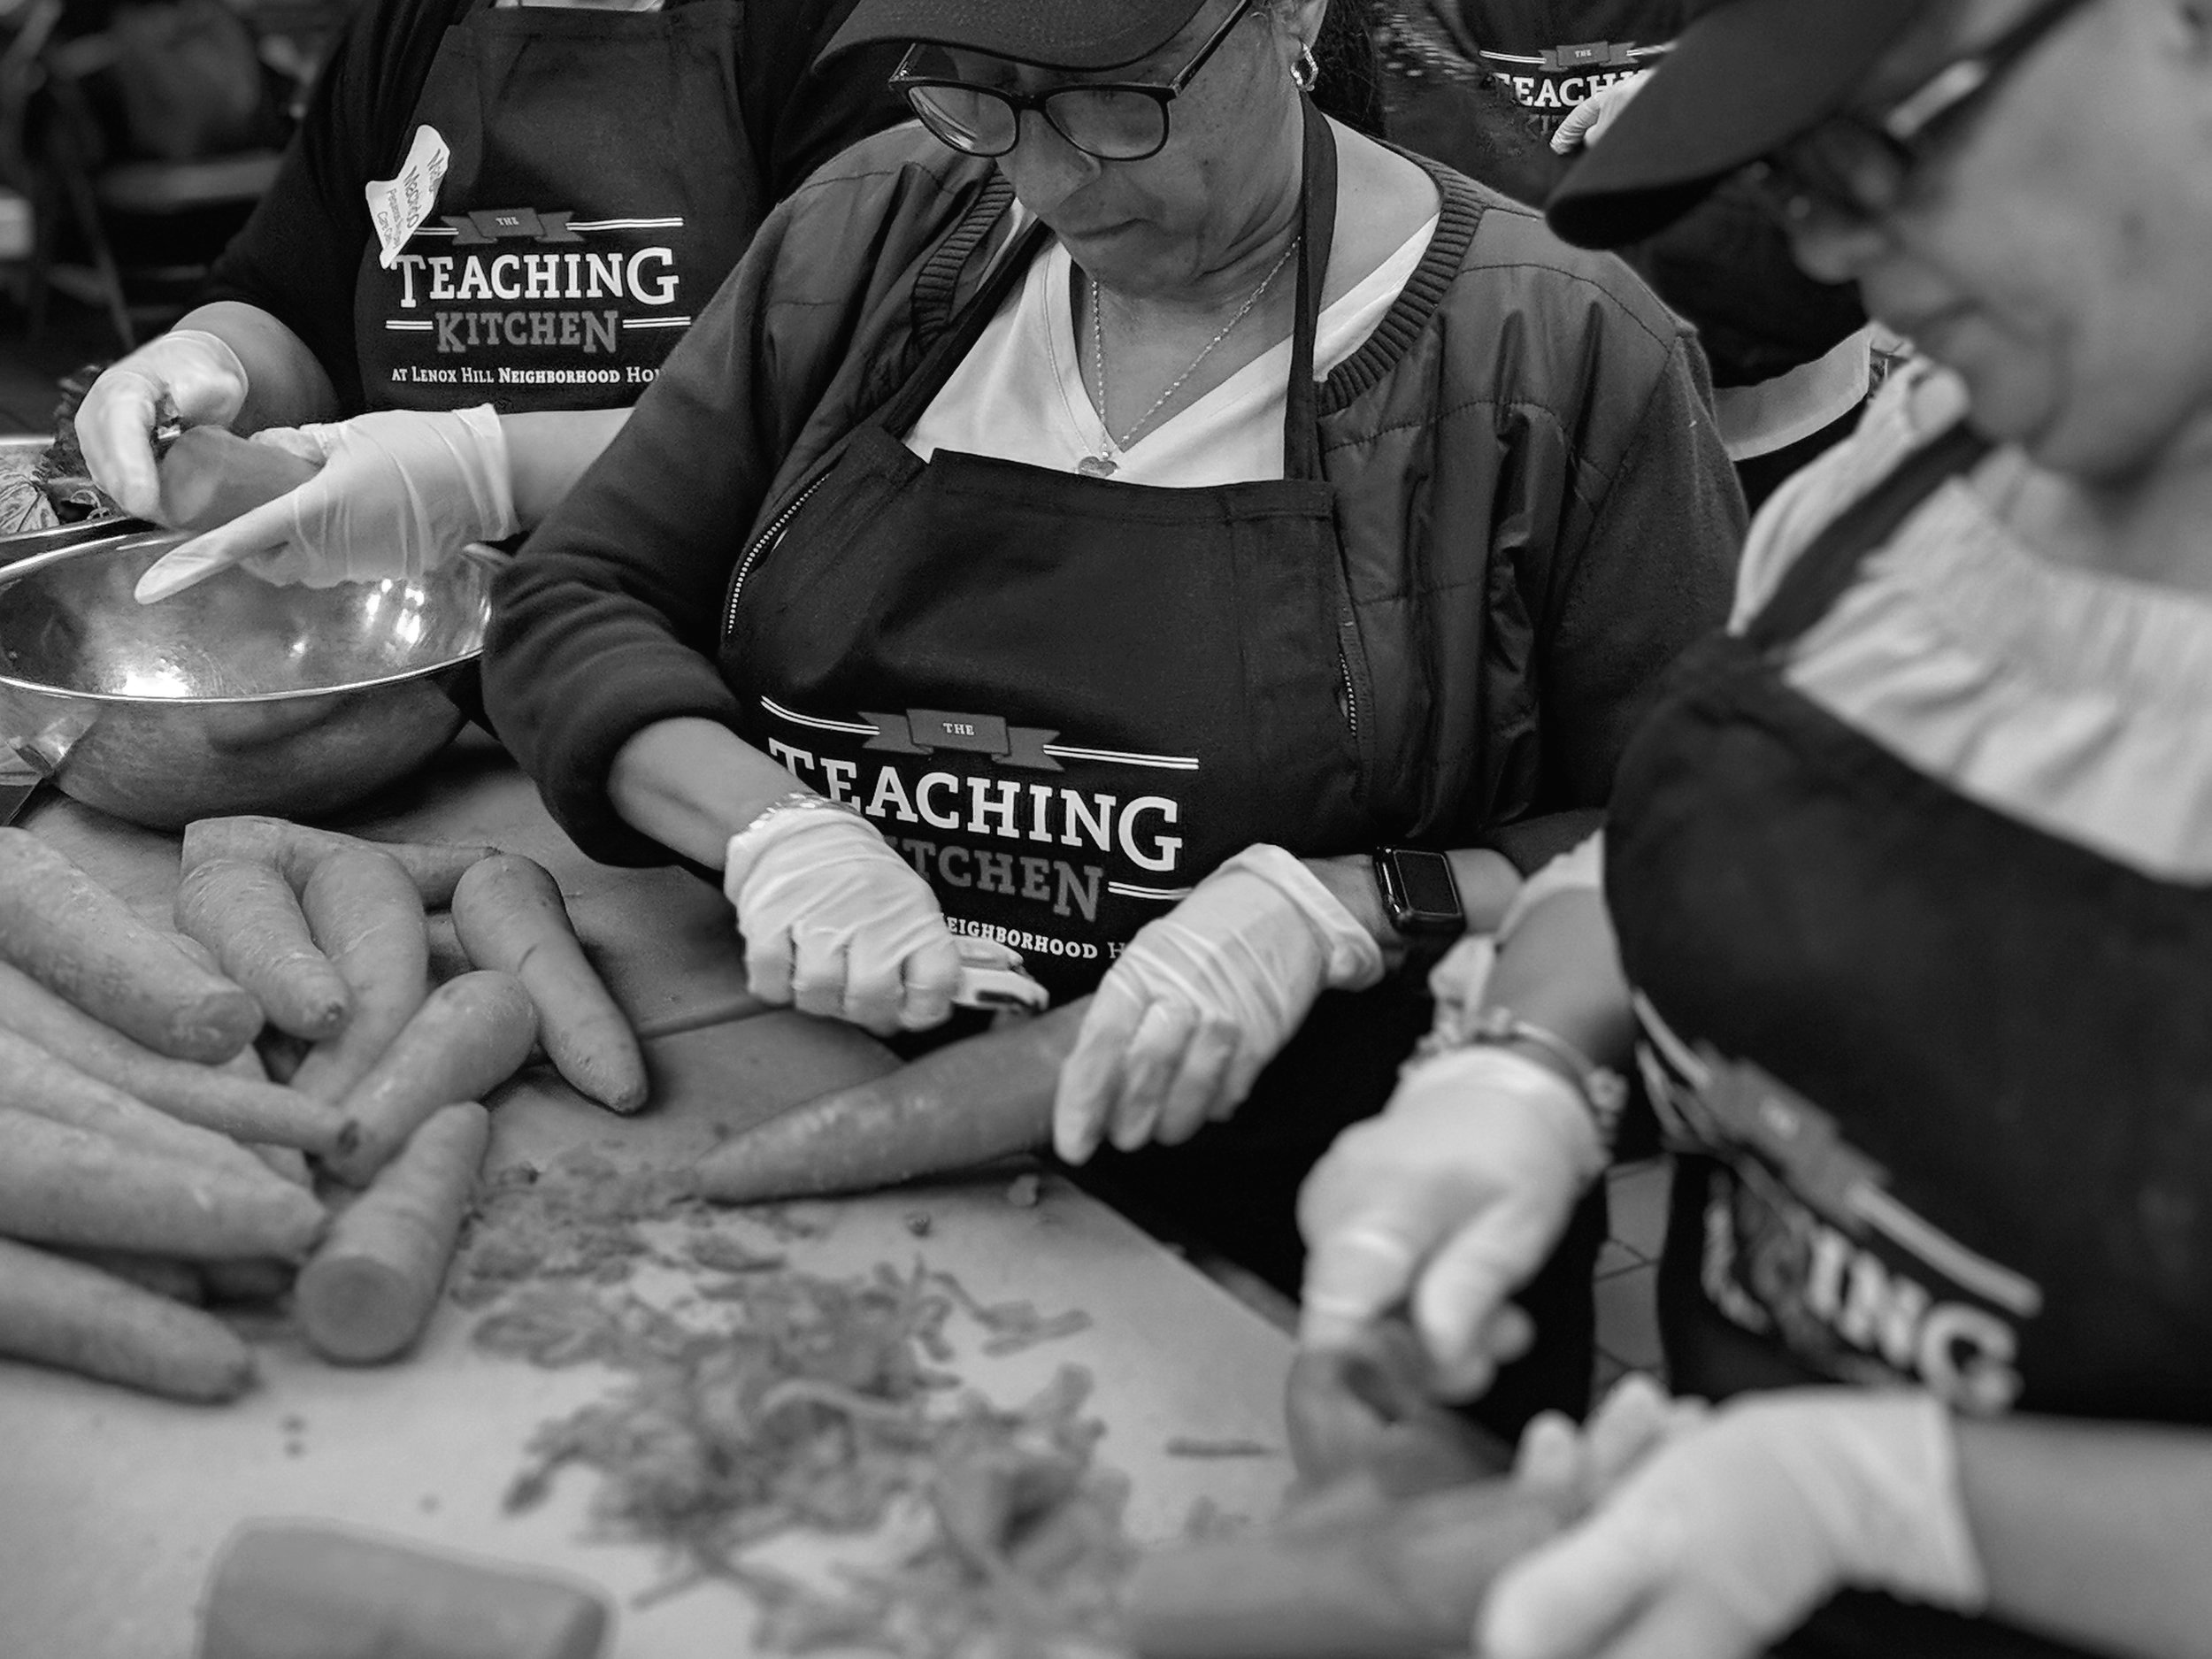  Leading-Edge Farm-to-Institution Training Program    The Teaching Kitchen     Learn More  